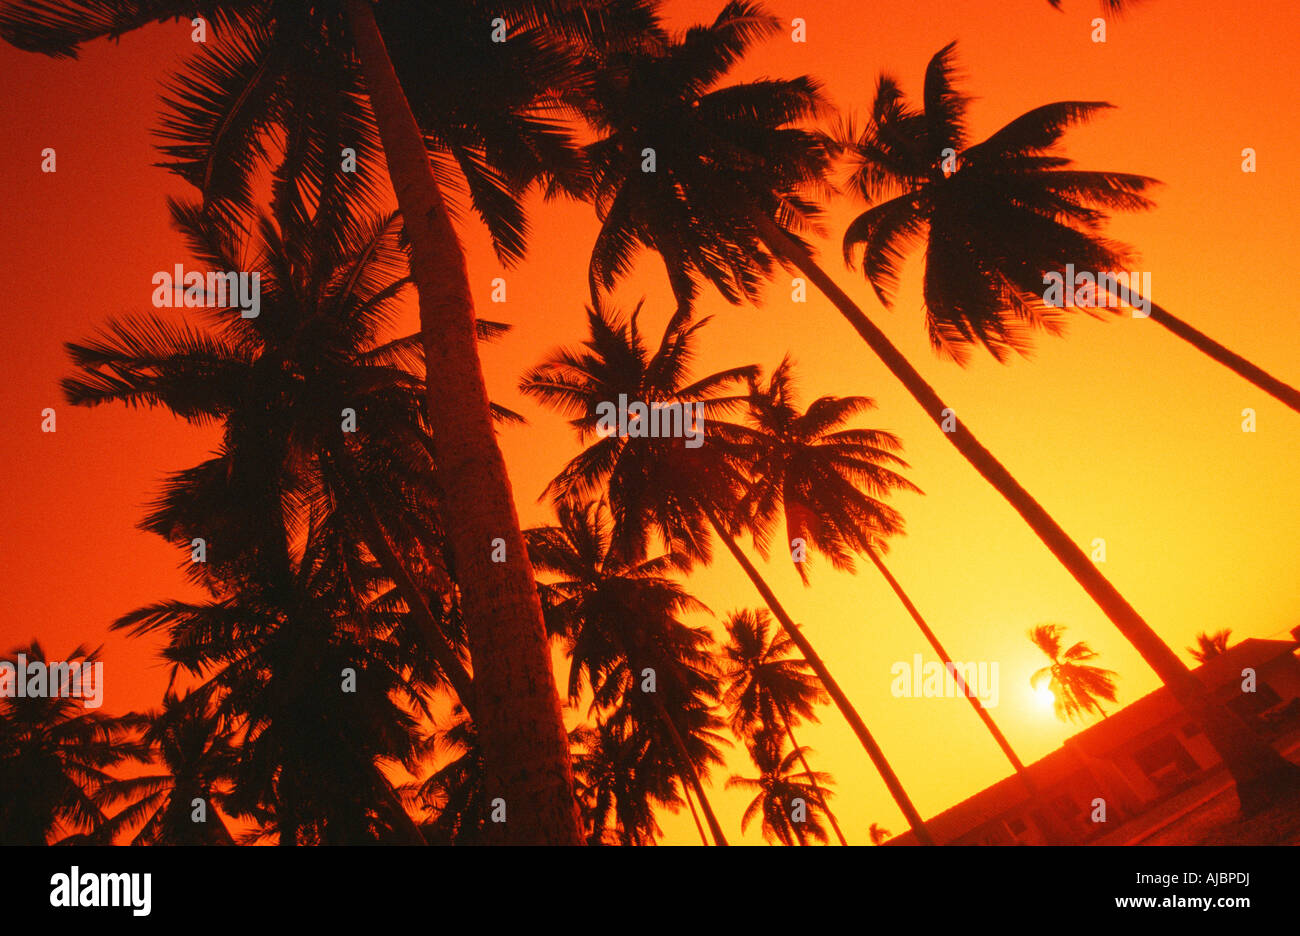 A Upward View Of Palm Trees Silhouetted By the Sunset Stock Photo